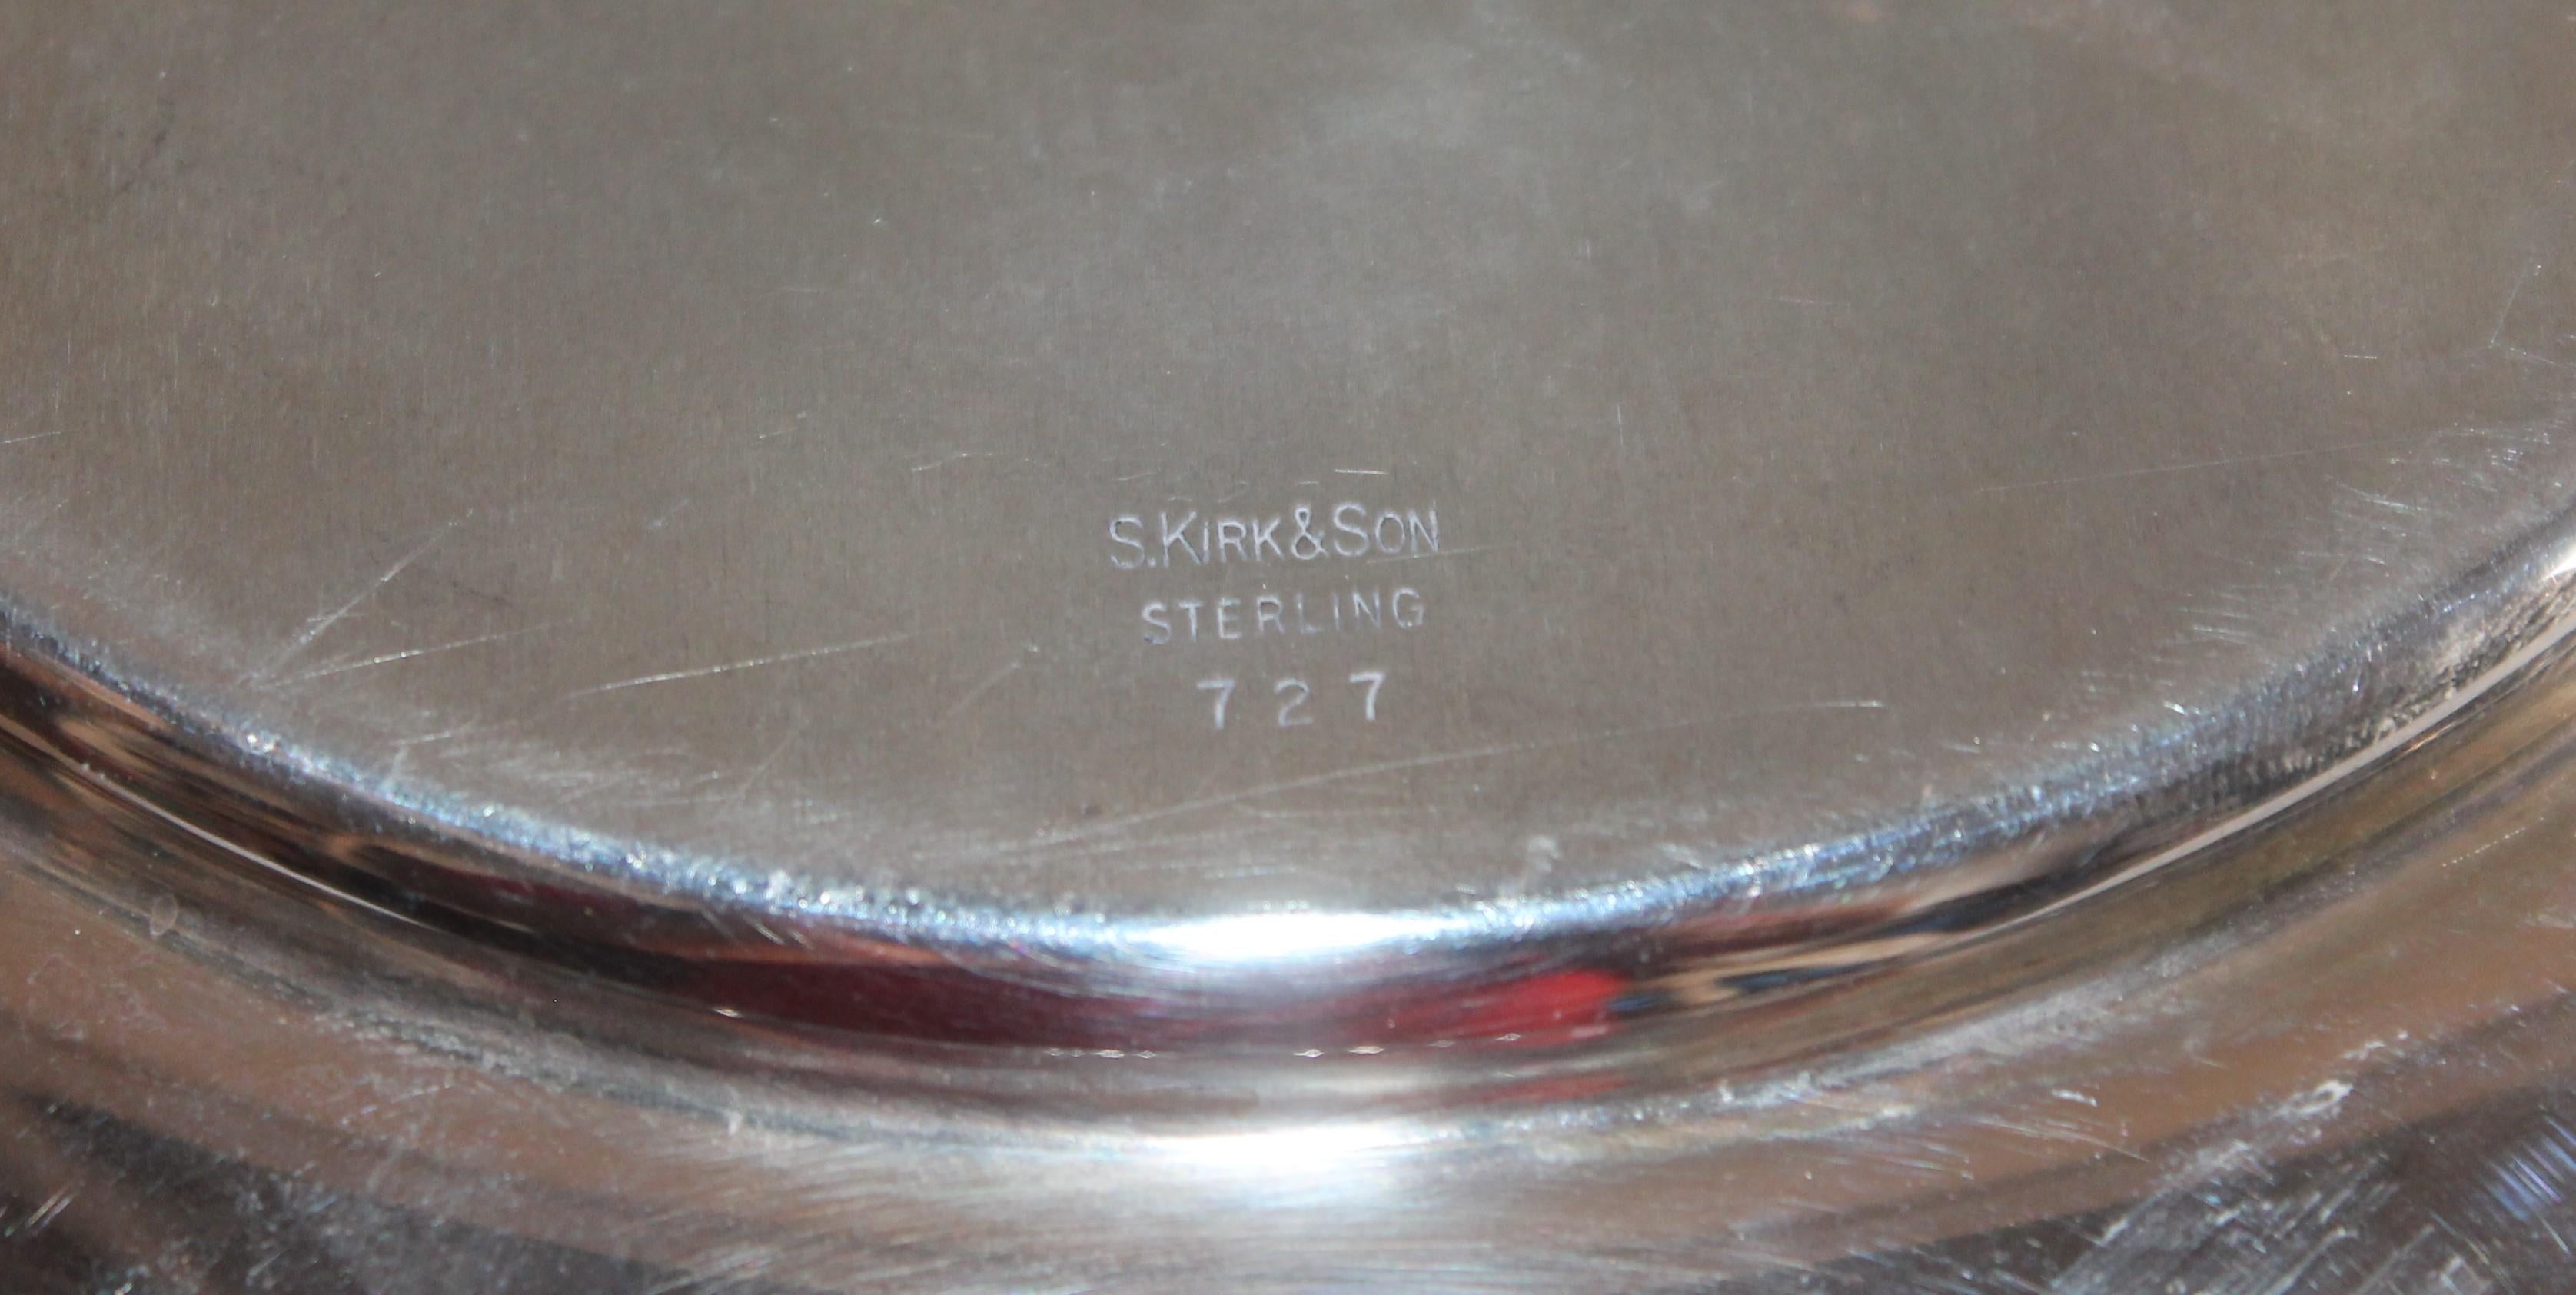 American S. Kirk & Sons Sterling Silver Repose Platter For Sale